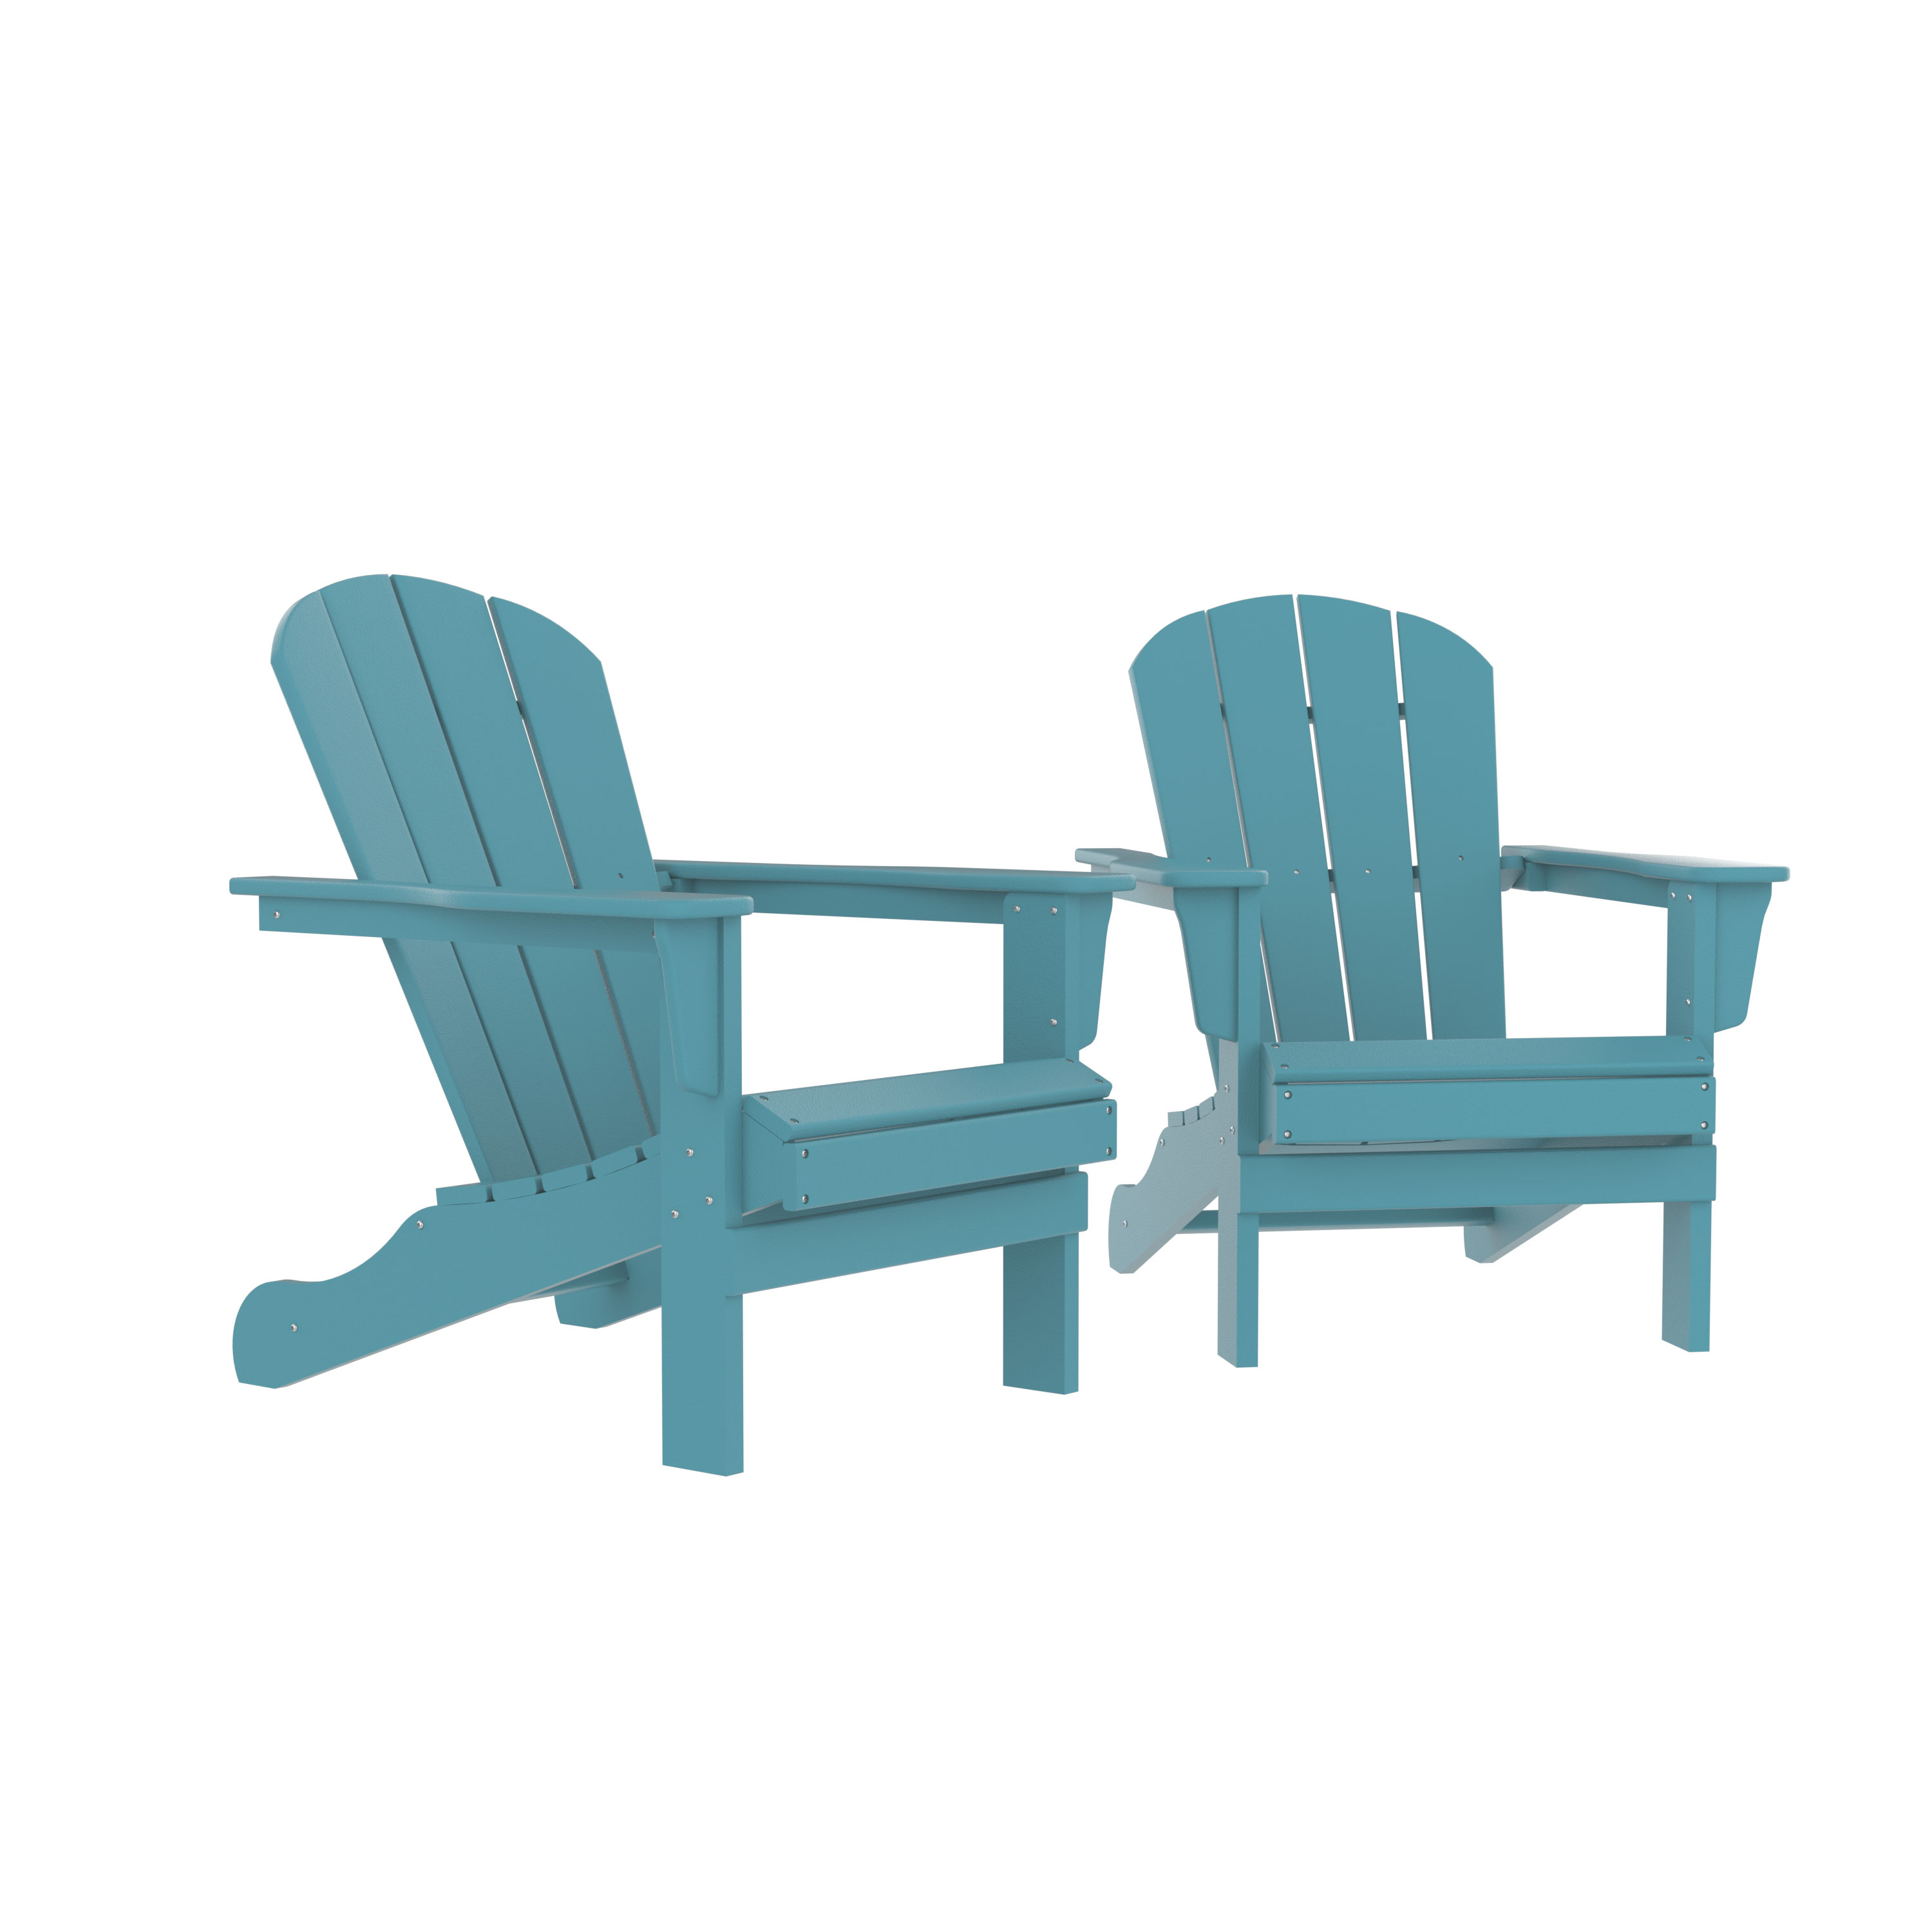 Clearance! HDPE Adirondack Chair, Fire Pit Chairs, Sand Chair, Patio Outdoor Chairs,DPE Plastic Resin Deck Chair, lawn chairs, Adult Size ,Weather Resistant for Patio/ Backyard/Garden ,Set of 2 - image 1 of 6